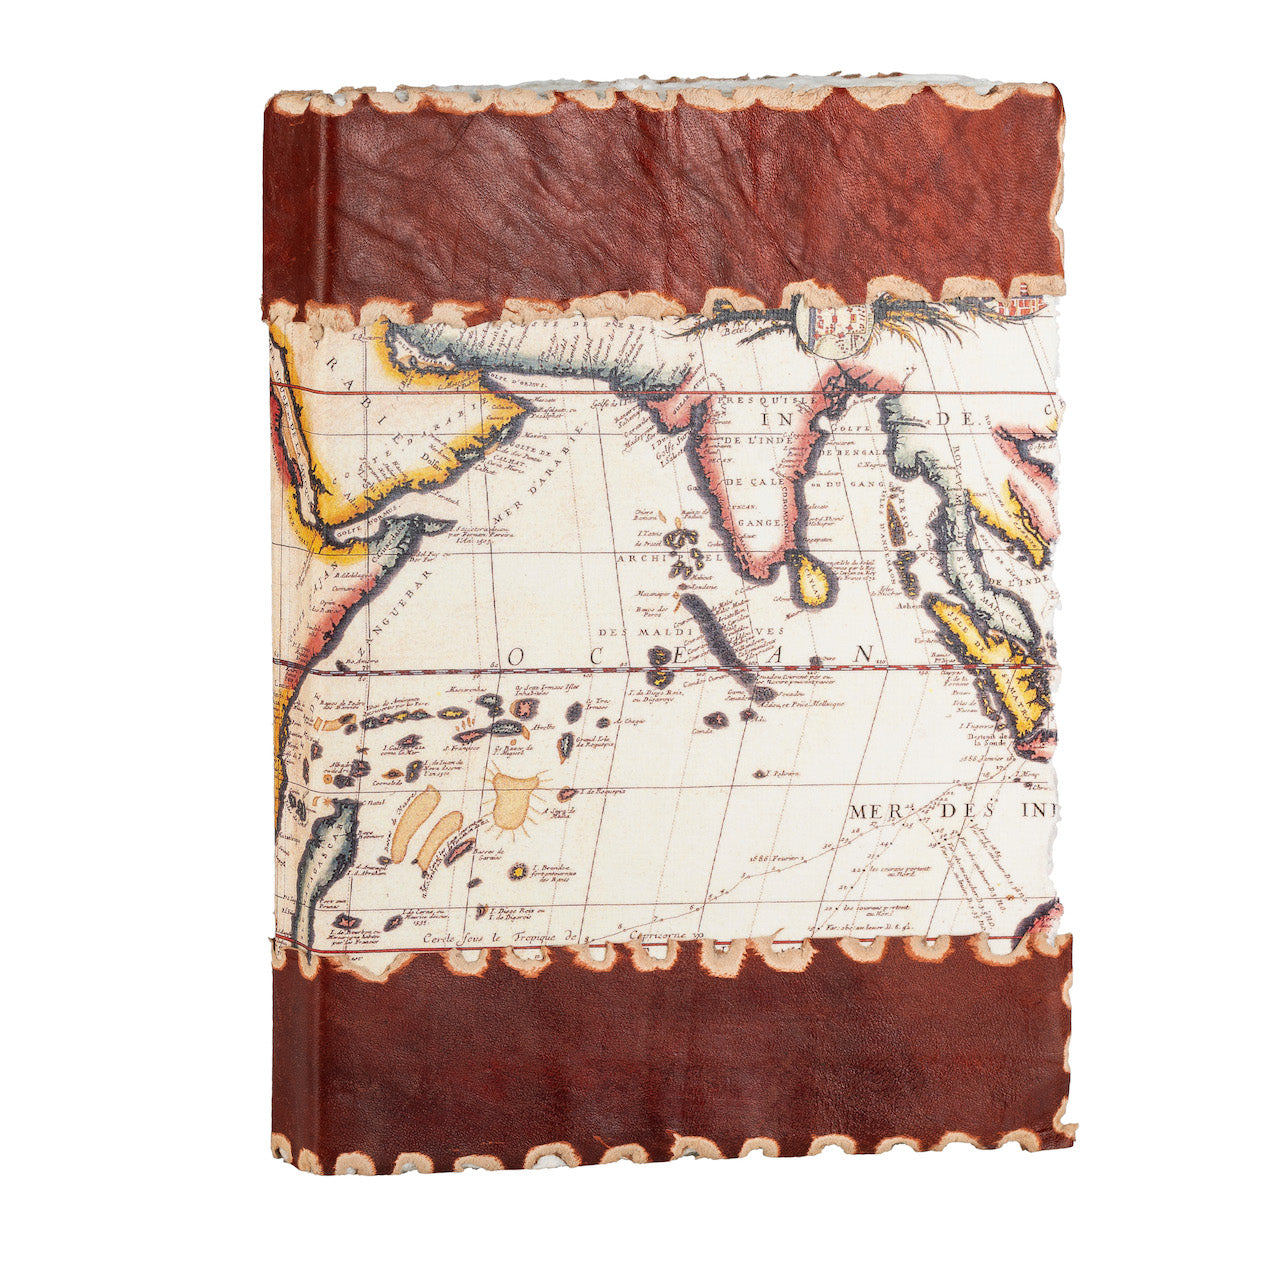 Tuk Tuk Press® Handmade Leather Journal with 144 Hand Pulled Cotton Pages, Vintage World Map